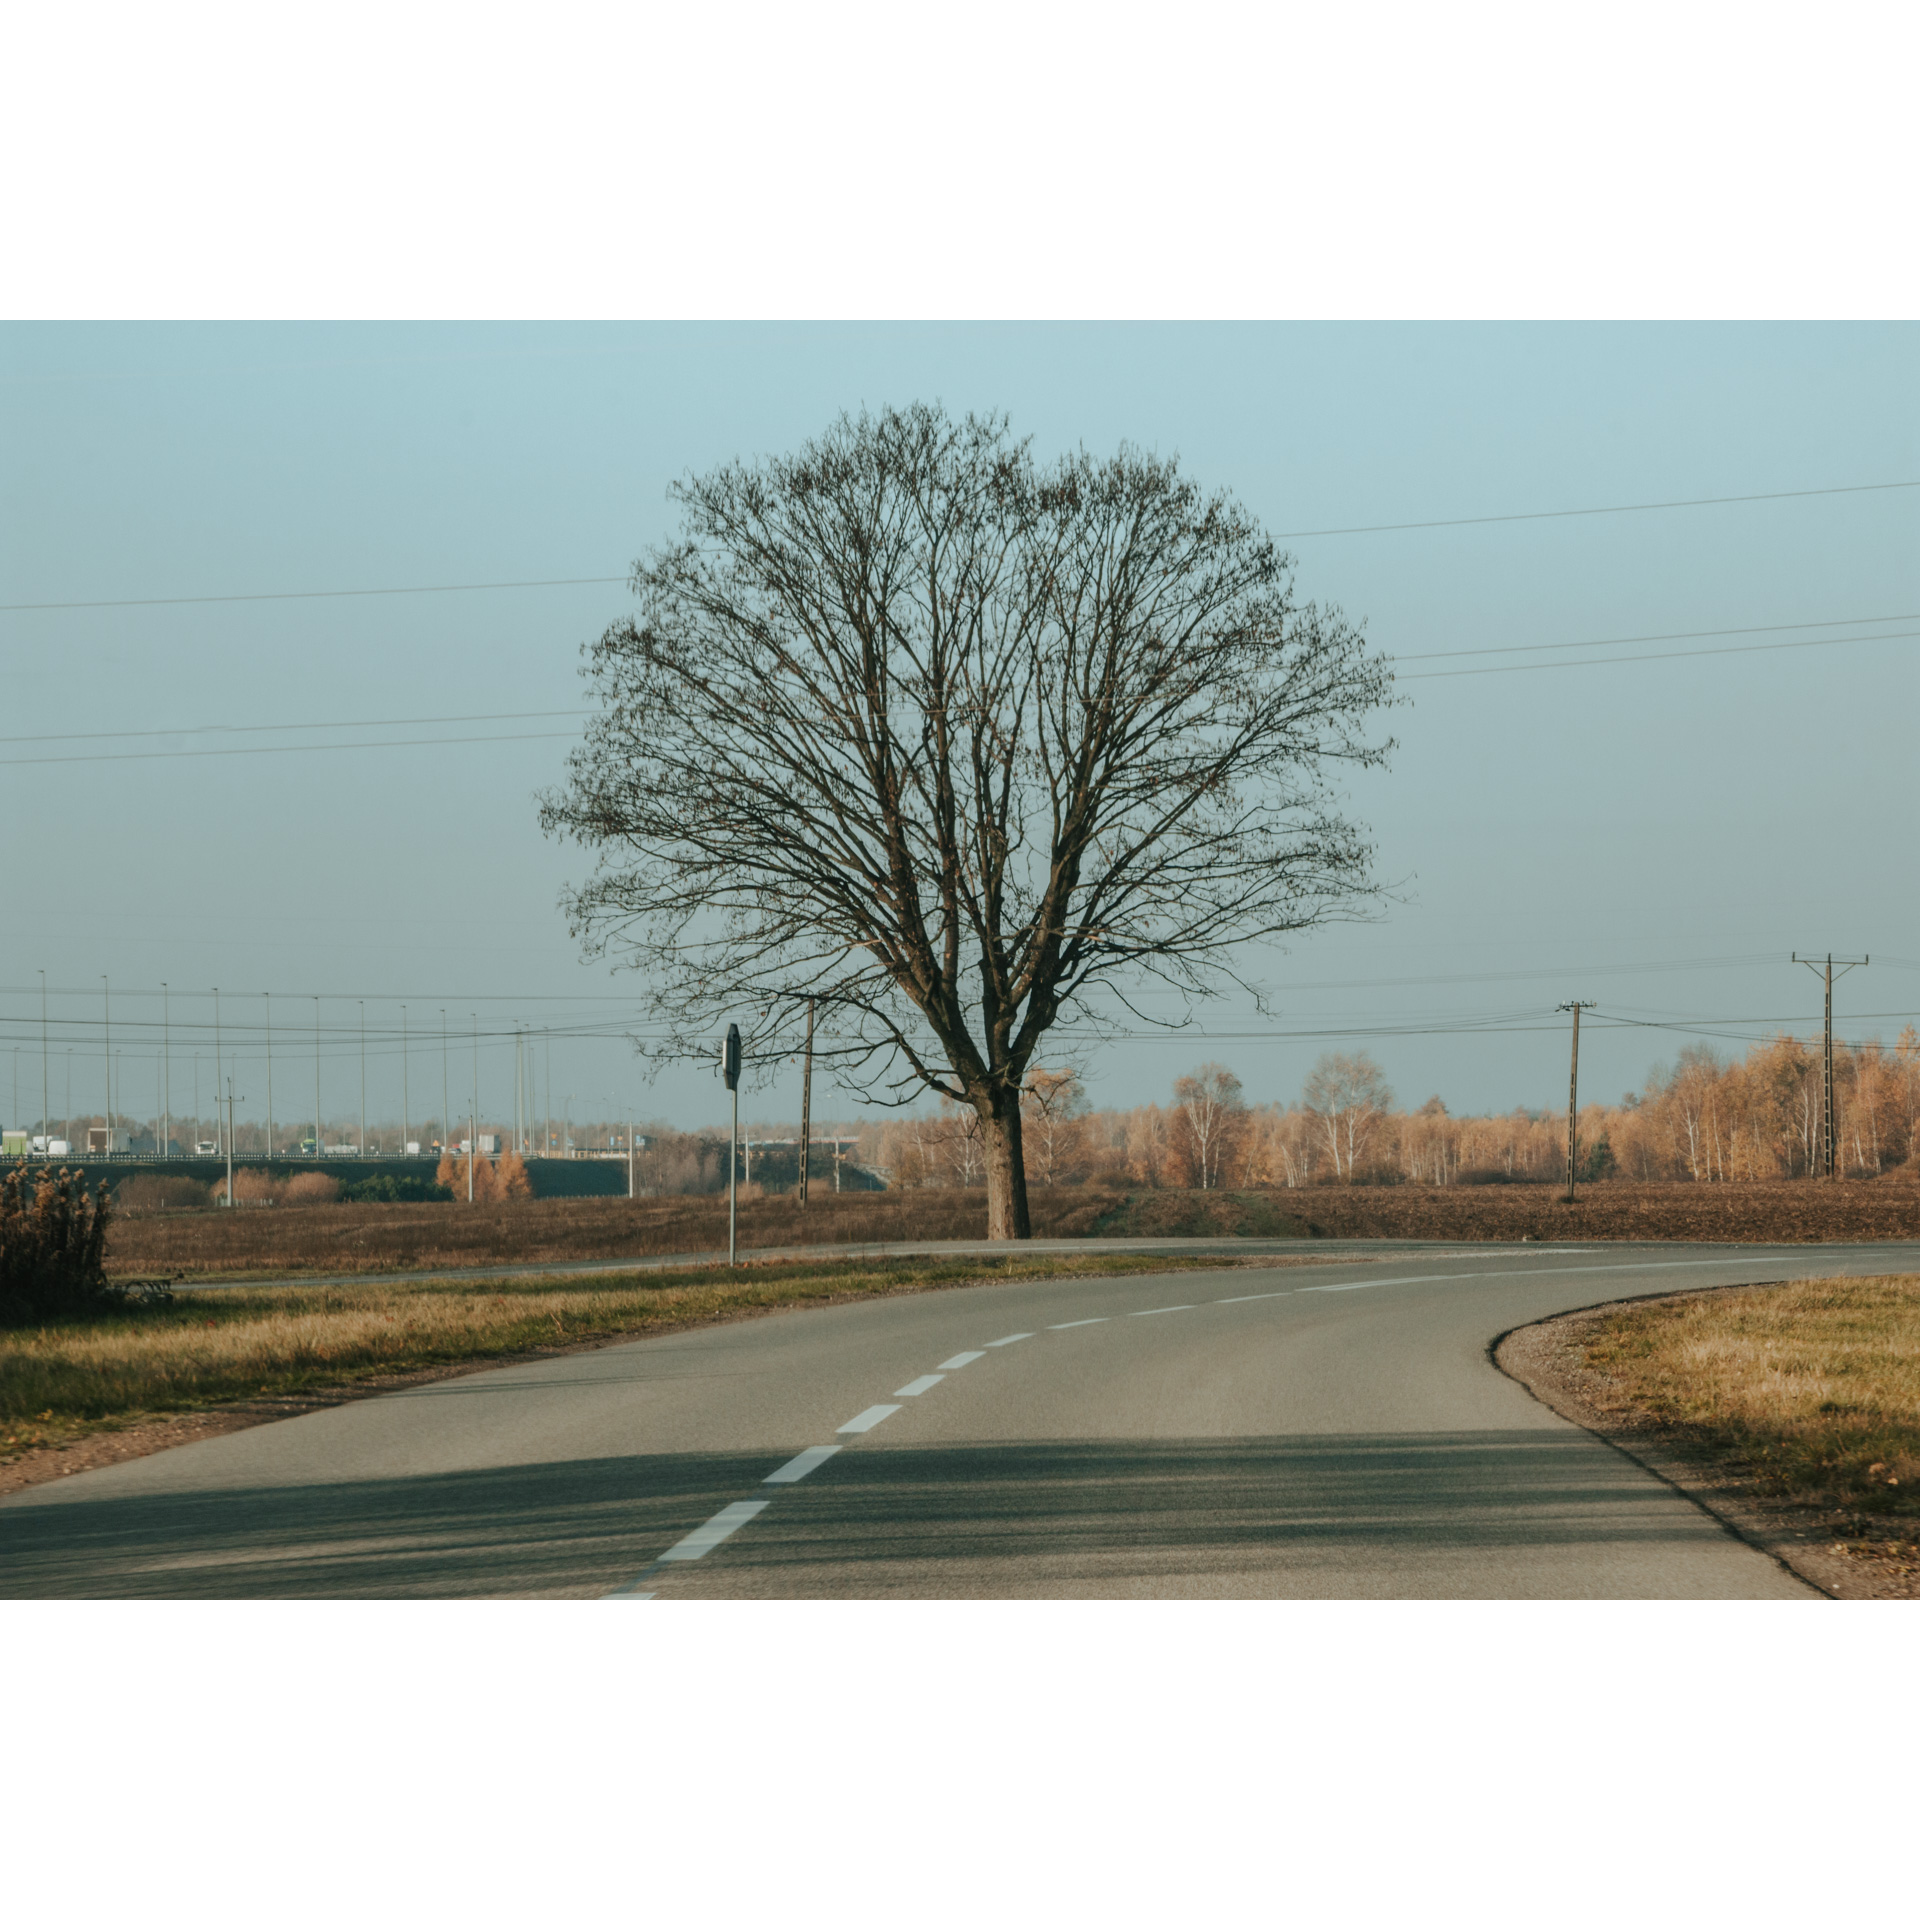 A large deciduous tree standing at the intersection of asphalt roads